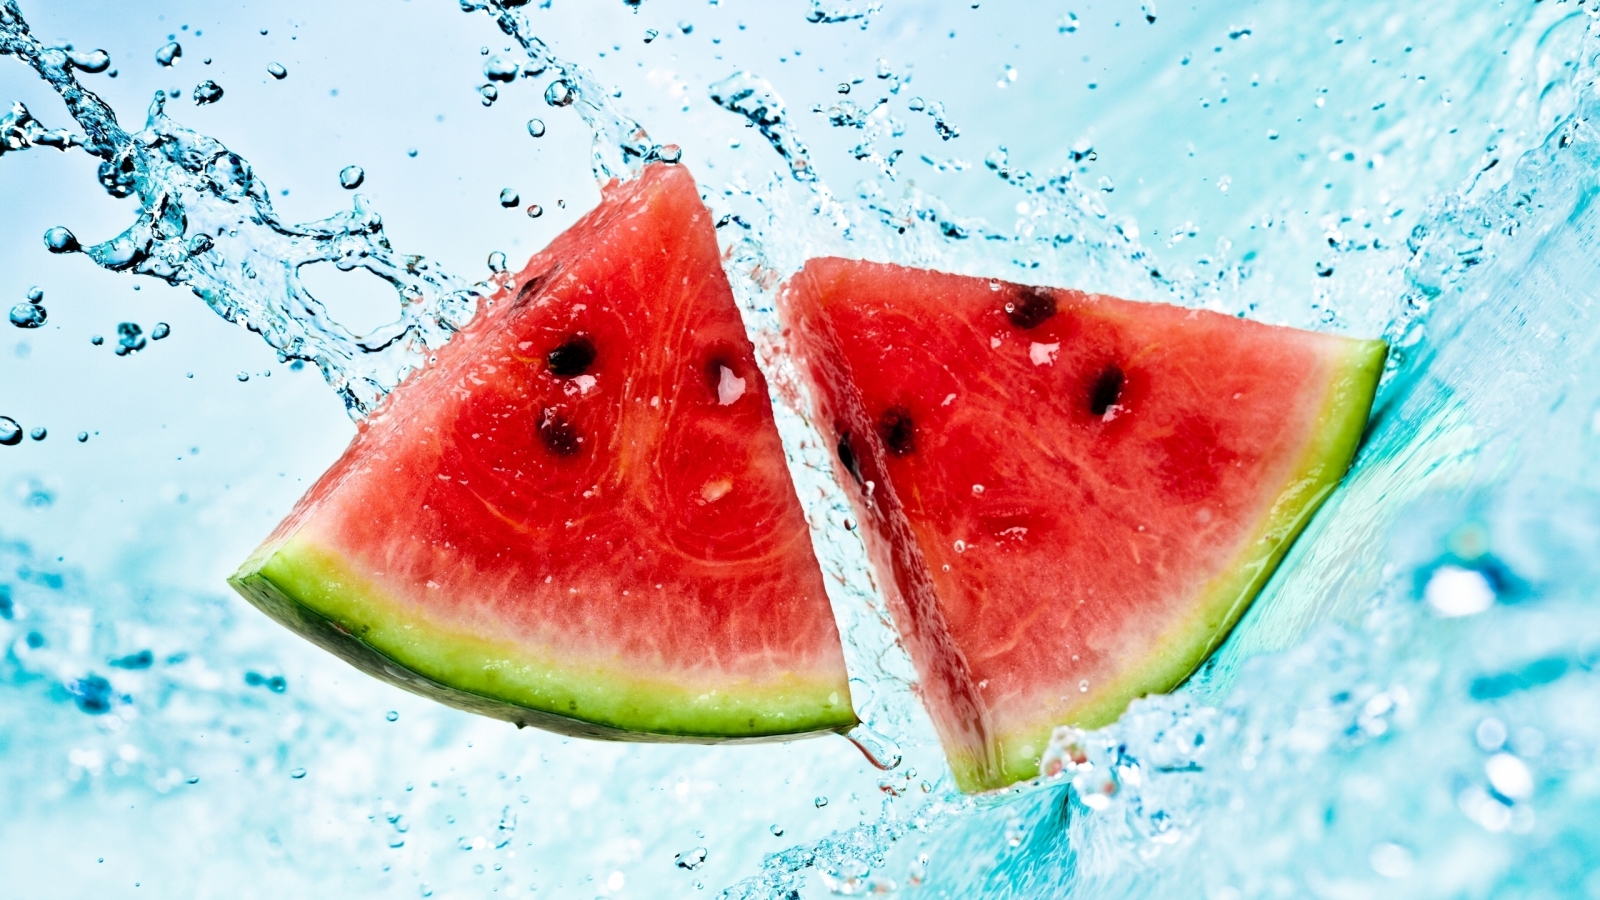 Watermelon Slices for 1600 x 900 HDTV resolution